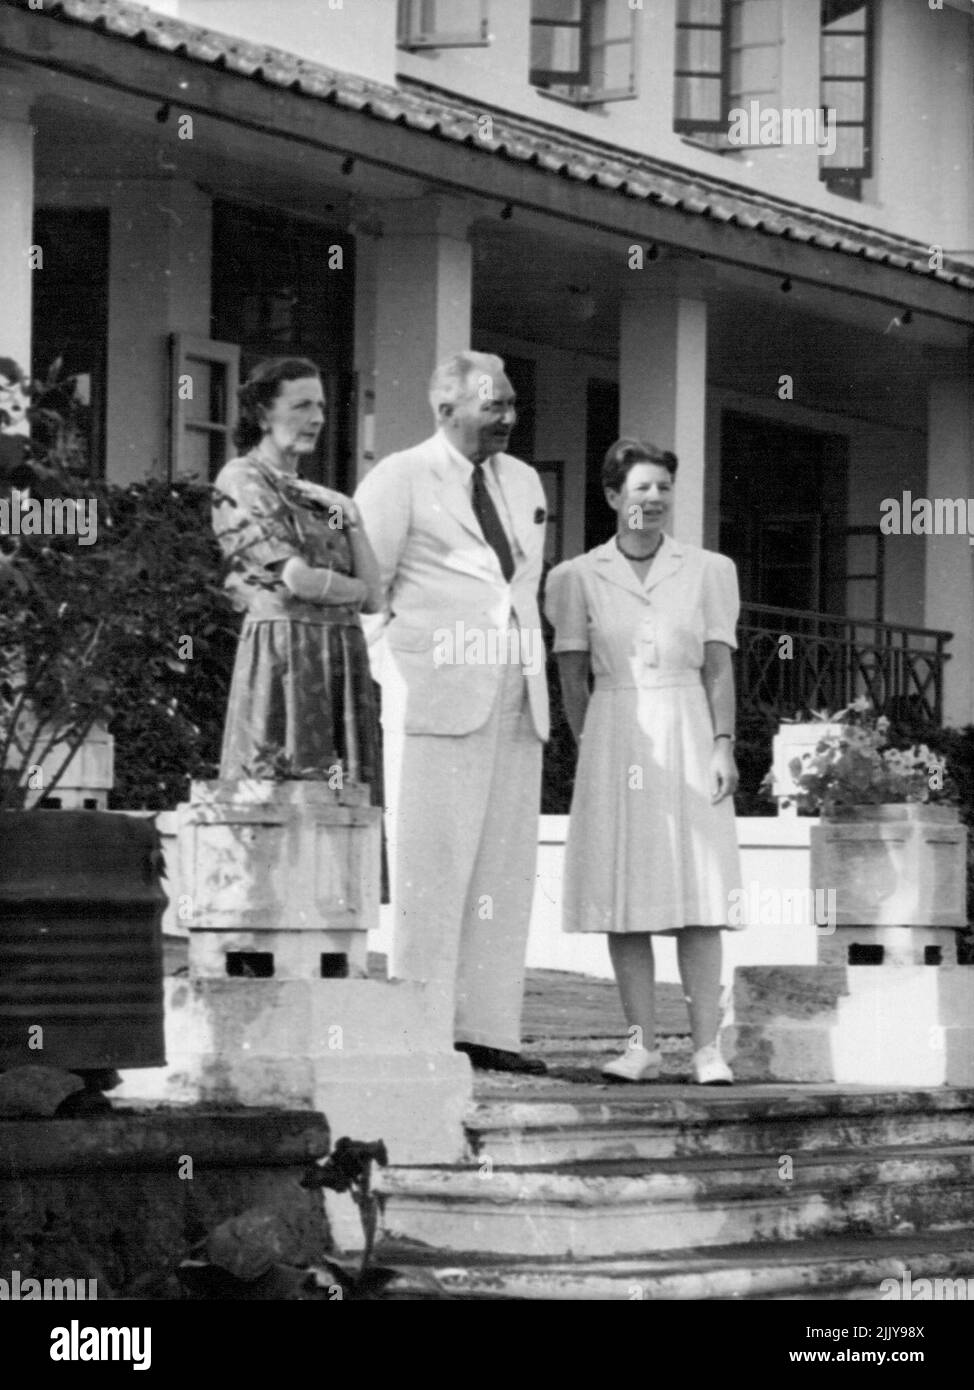 Lady Mountbatten In West Africa - The Countess Mountbatten of Burma, Superintendent-in-Chief of the St. John Ambulance Brigade, is on a visit to the West African colonies to find out what help her organisation can give to colonial medical work. Our picture shows Lady Mountbatten with Sir George Beresford Stooke, the Governor of Sierra Leone and Lady Beresford Stooke (right) at Governor's Lodge, Freetown. April 12, 1951. (Photo by Camera Press). Stock Photo